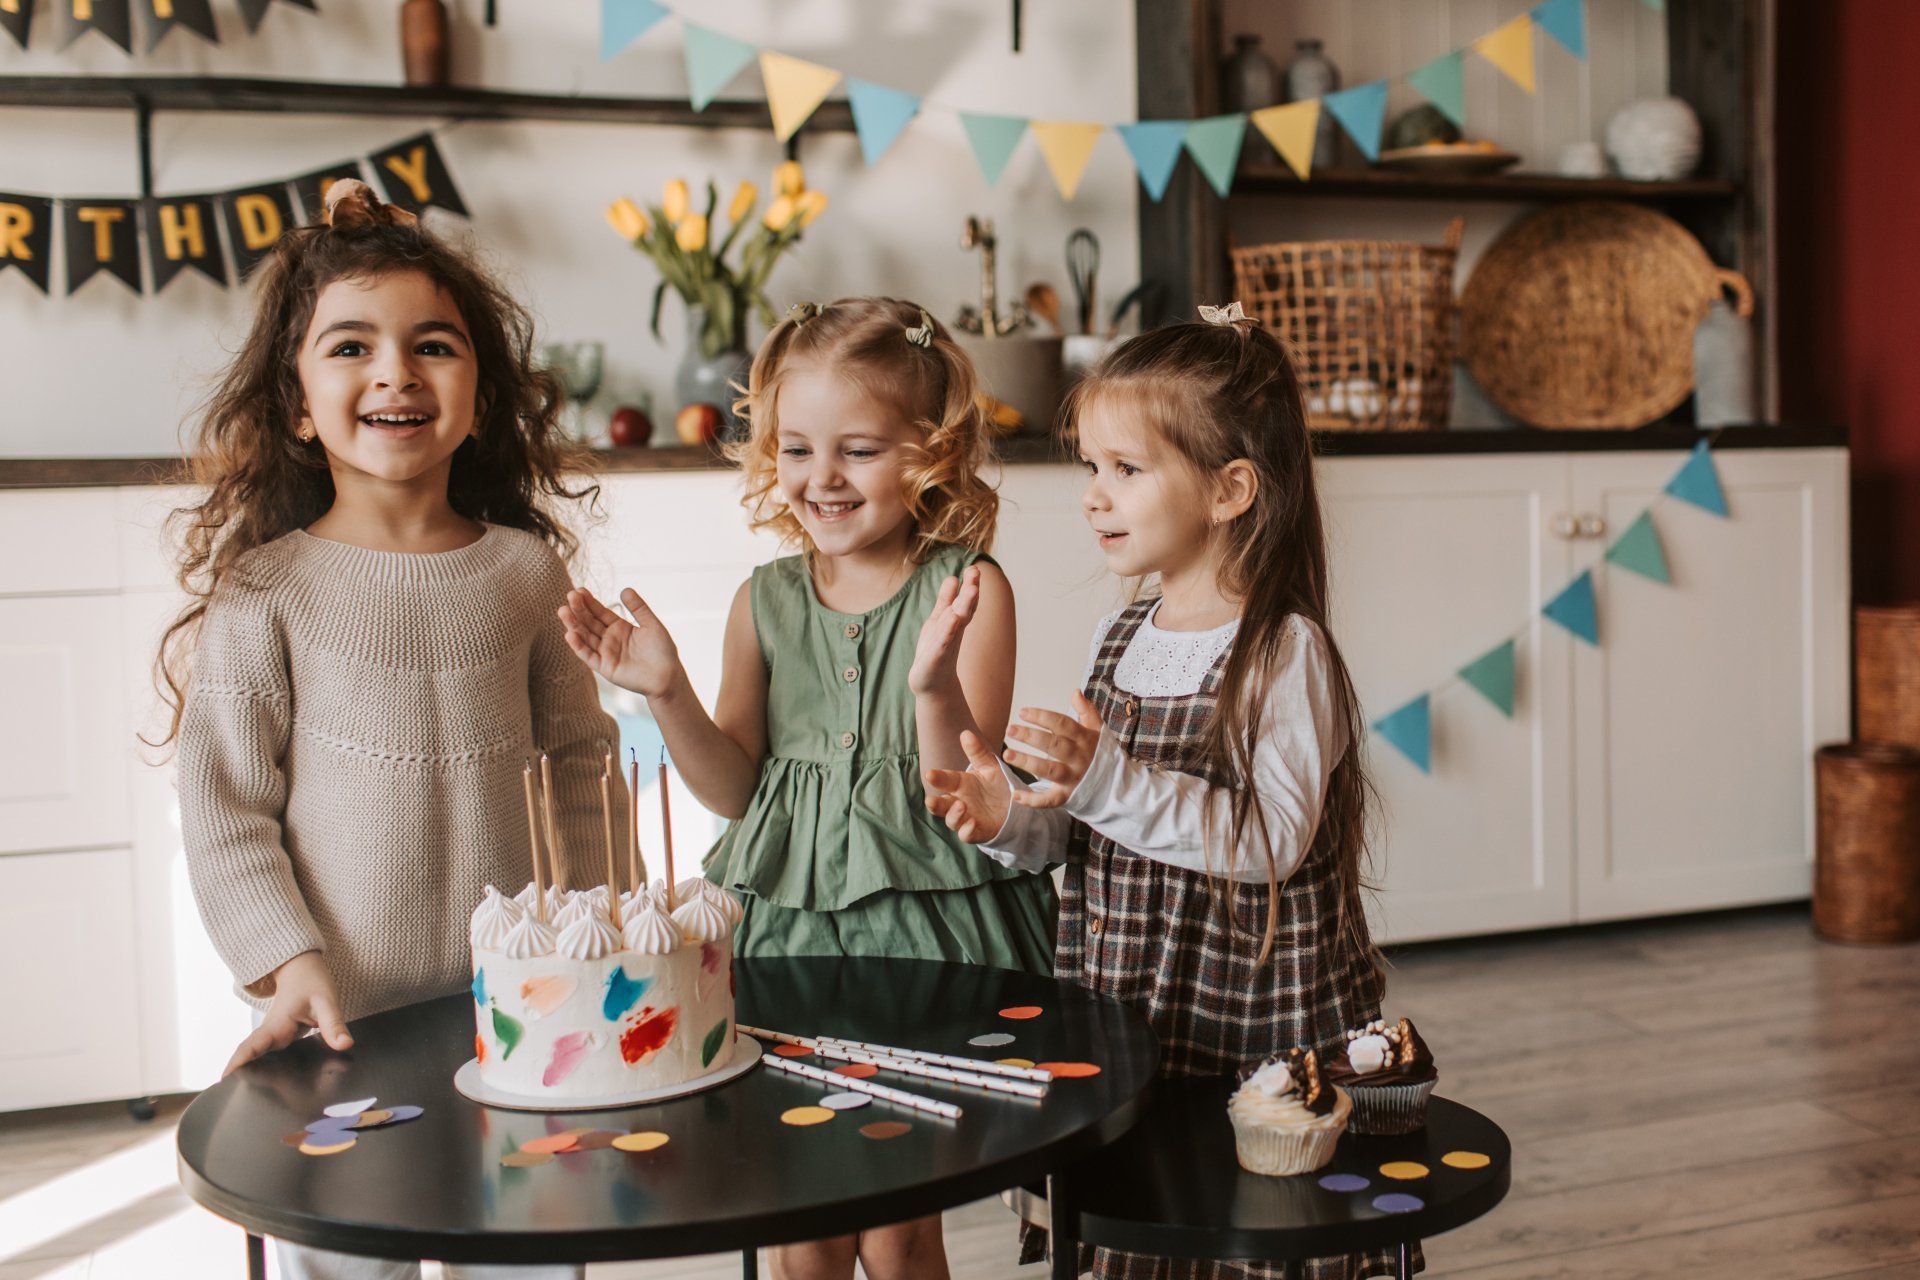 Three young Jewish girls smiling & standing at a table with a birthday cake on it